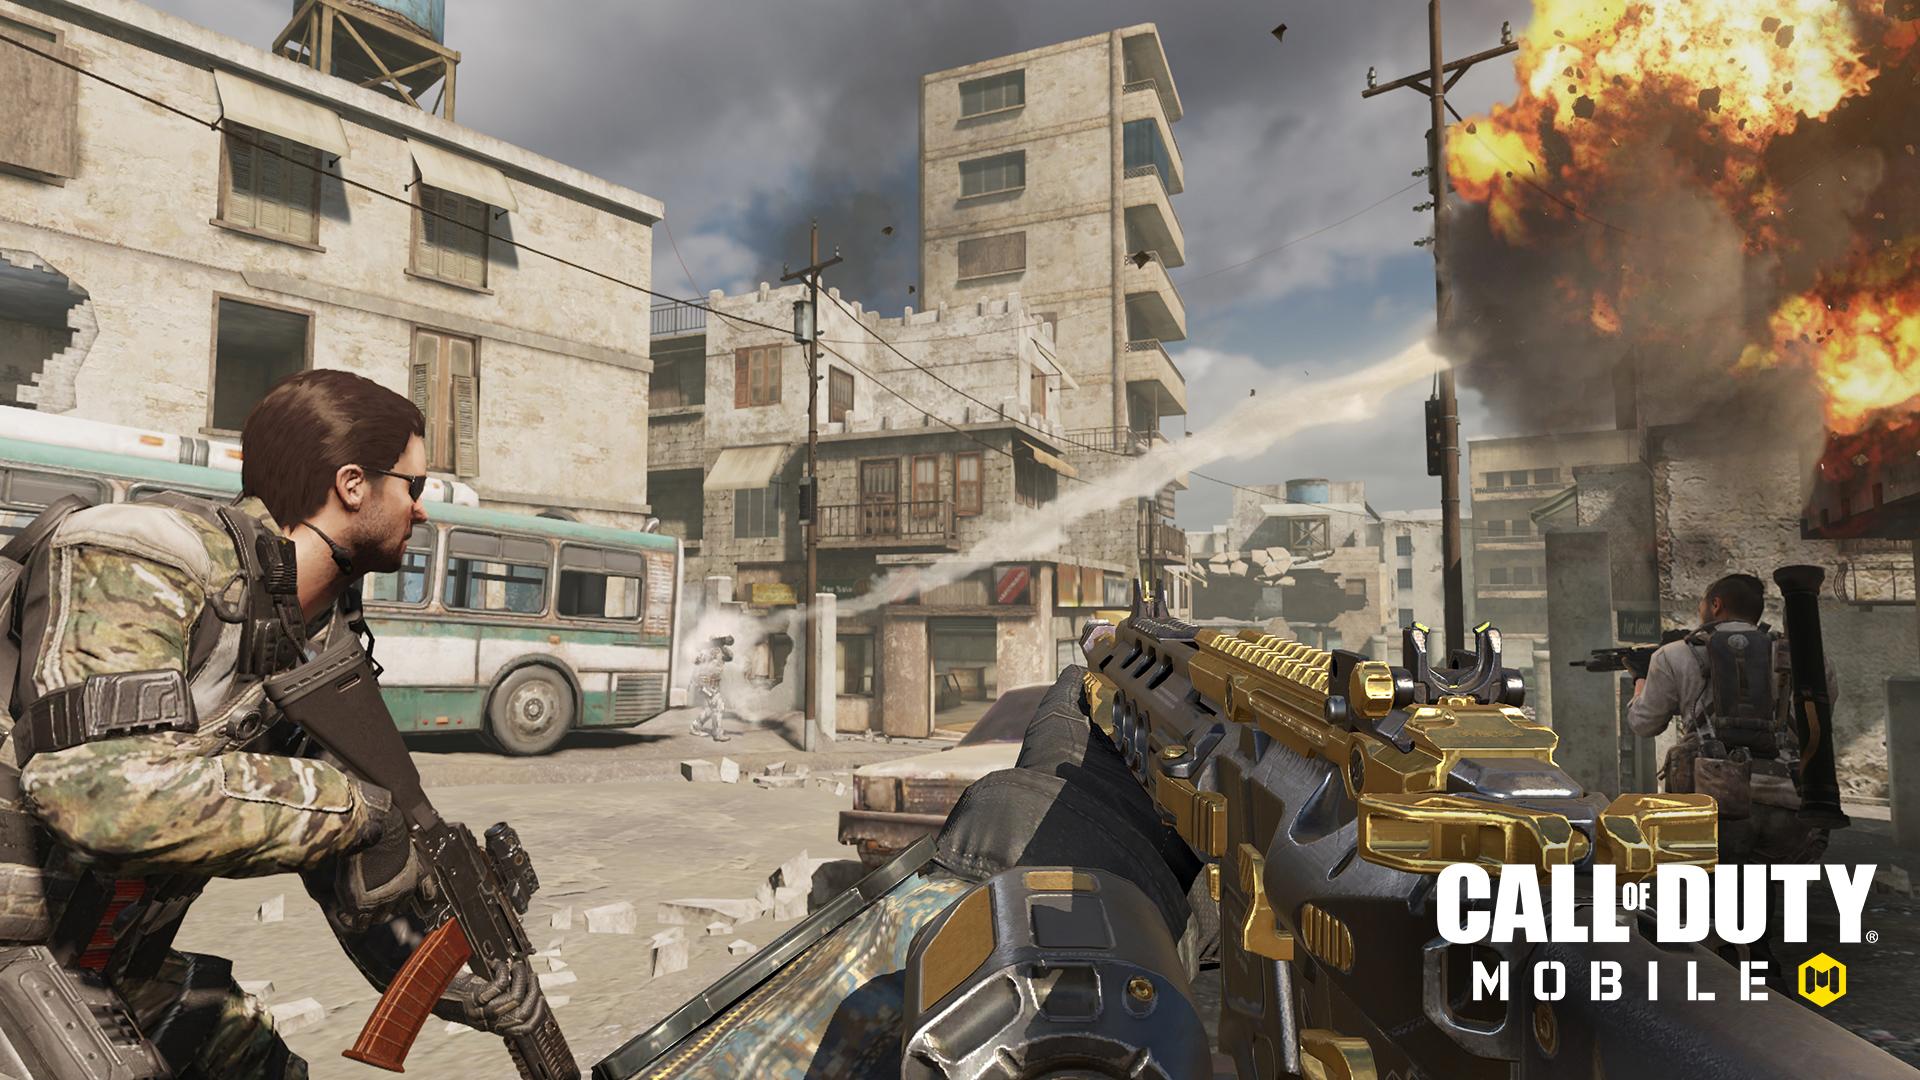 COD Mobile India - Call of Duty: Mobile is here! Play classic maps